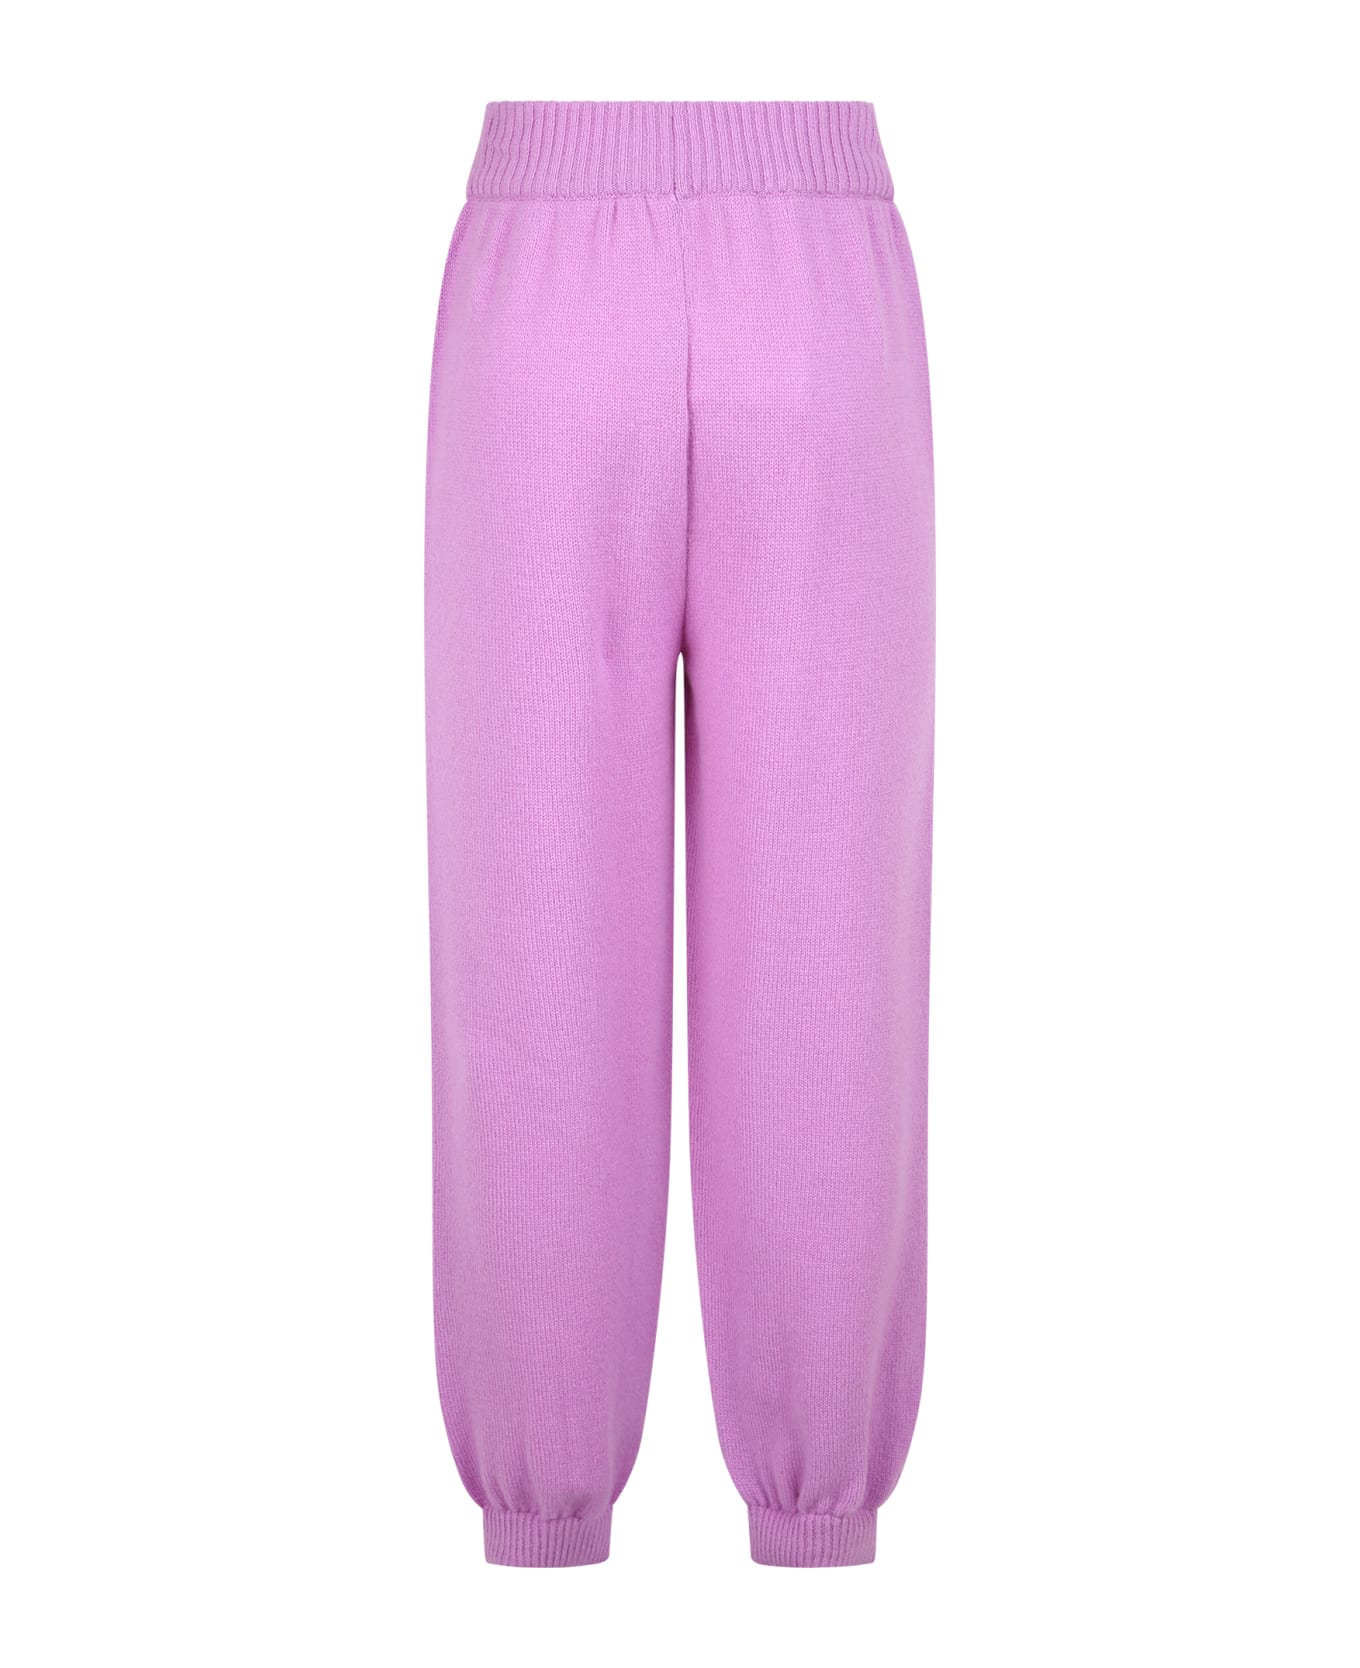 MSGM Relaxed Fit Trousers - Purple スウェットパンツ